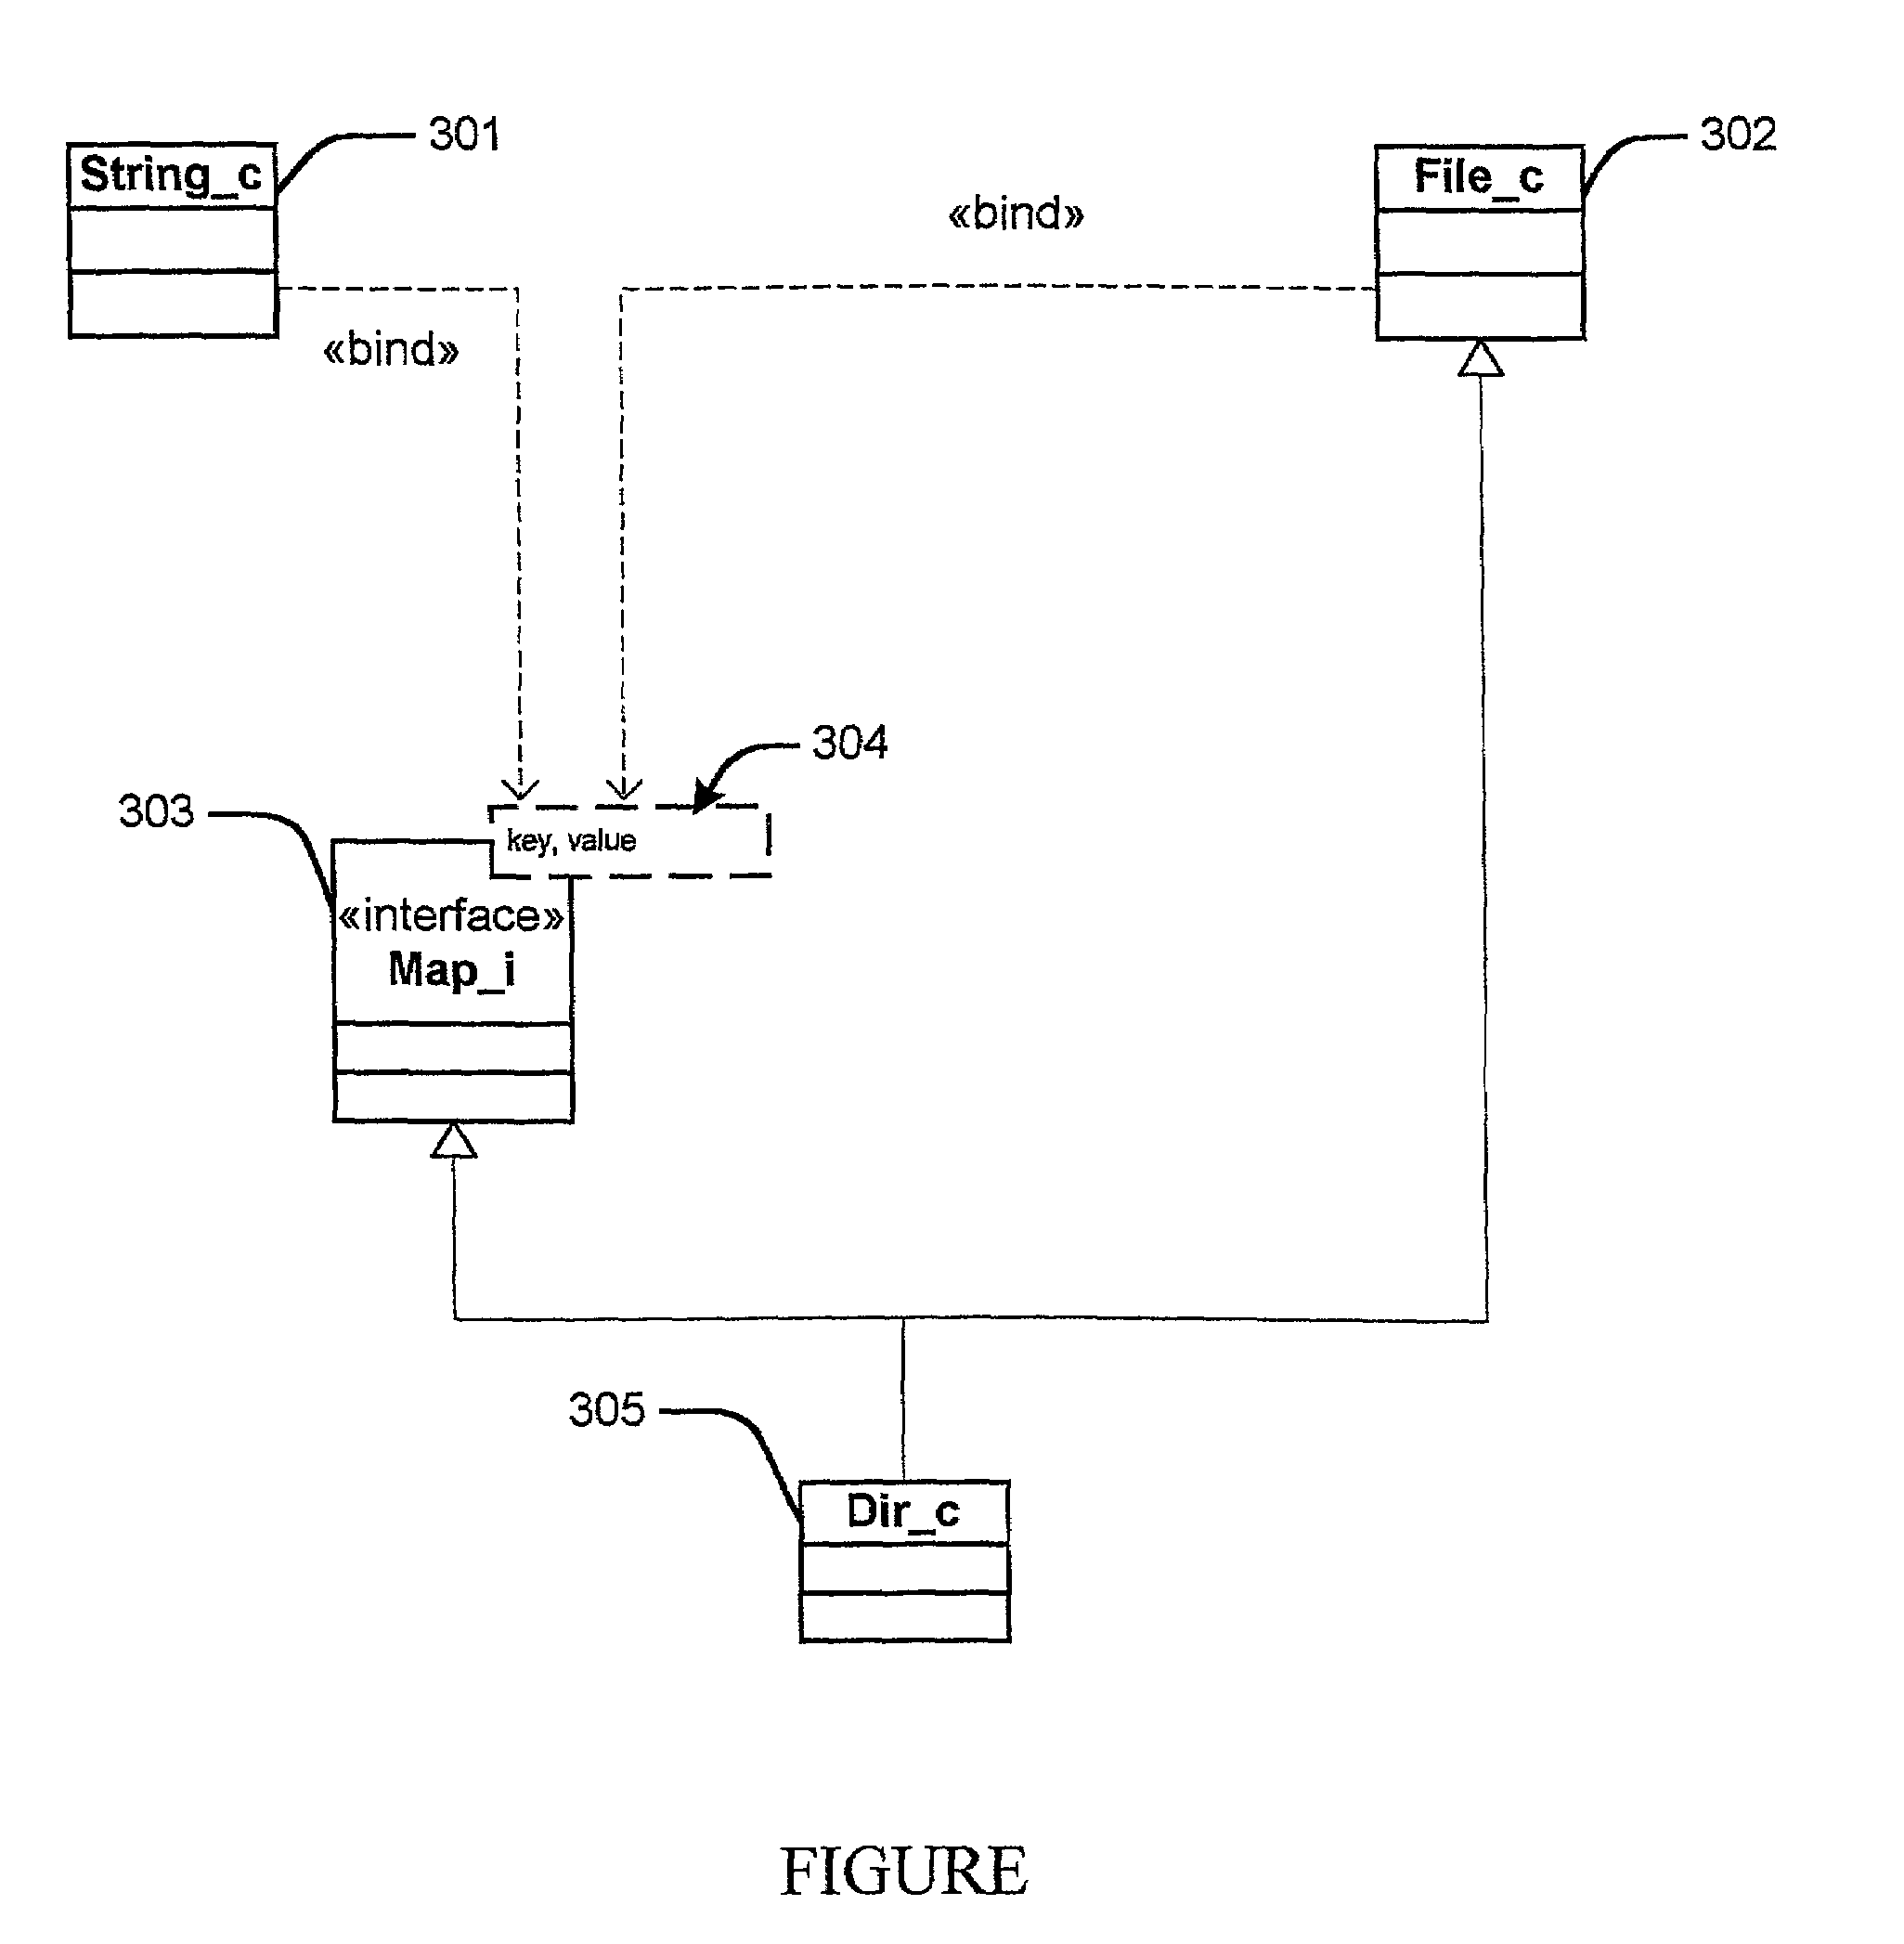 Method for enabling a compiler or interpreter to use identifiers found at run time in a map container object in a manner similar or identical to identifiers declared at compile time